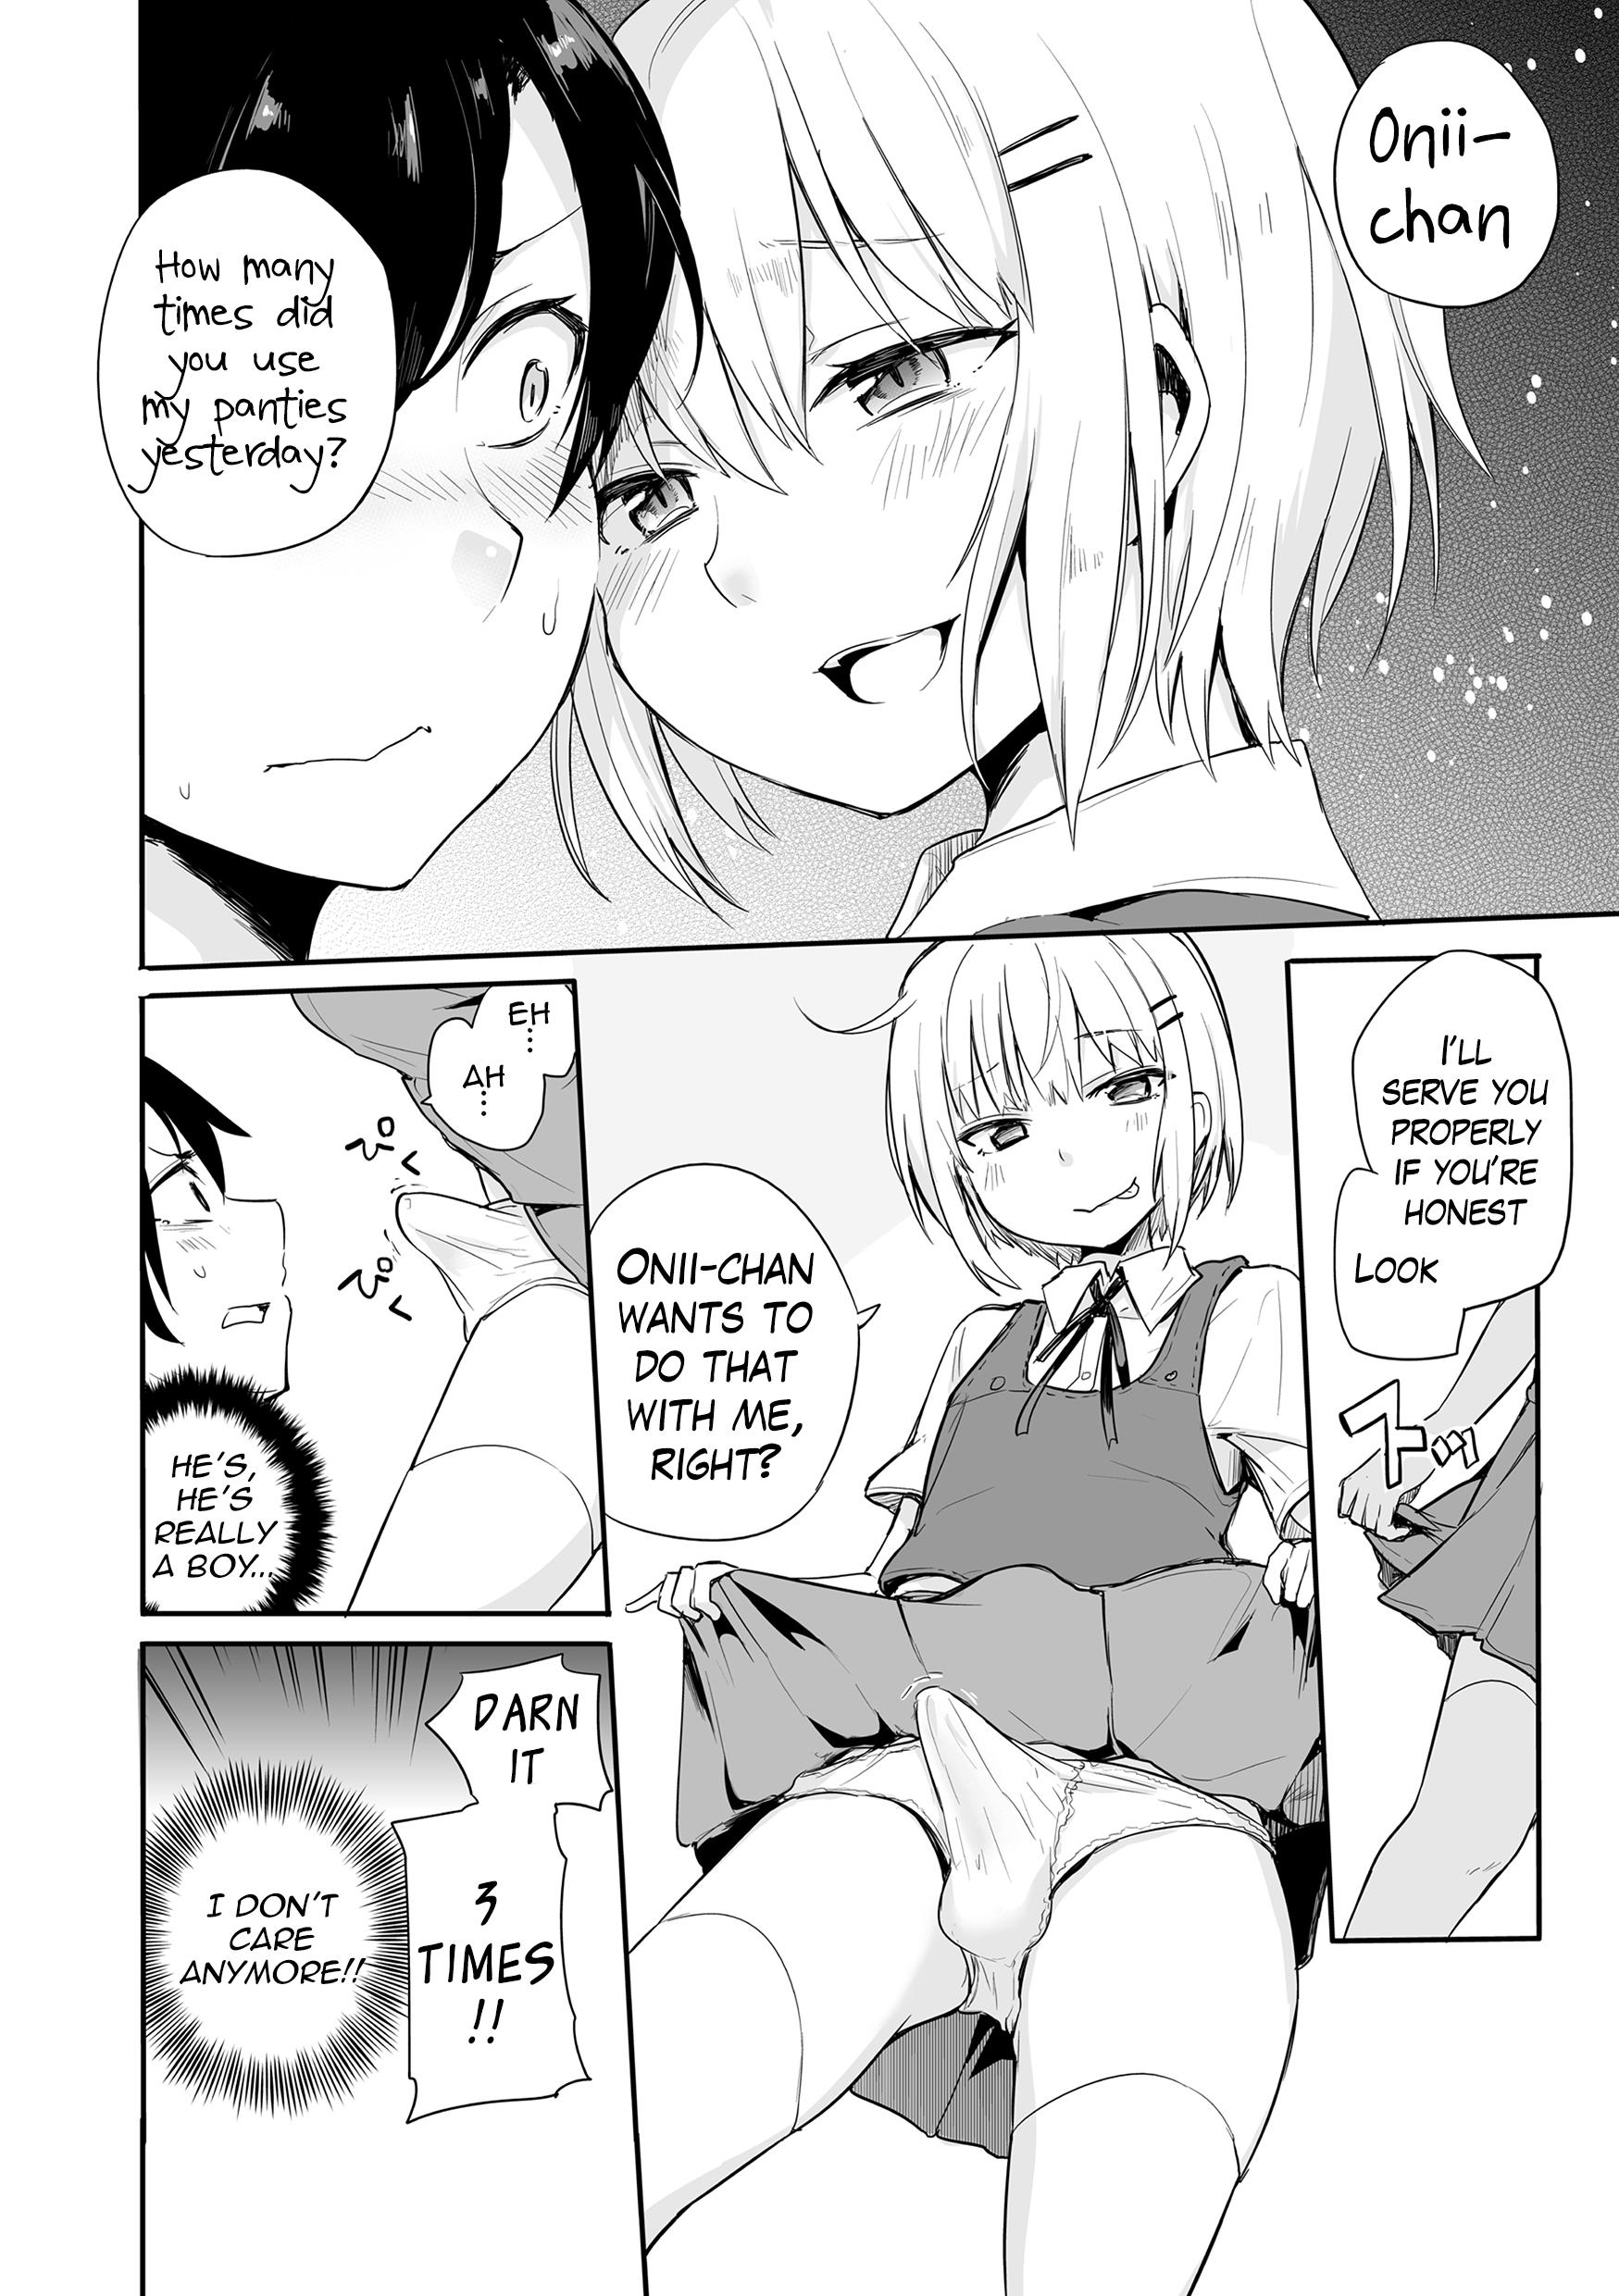 Ano Kono Joukyou de Otouto Route ga nai no wa Okashii! | This Situation is too Weird for it not to be a Little Brother’s Route! Webcamsex - Page 7